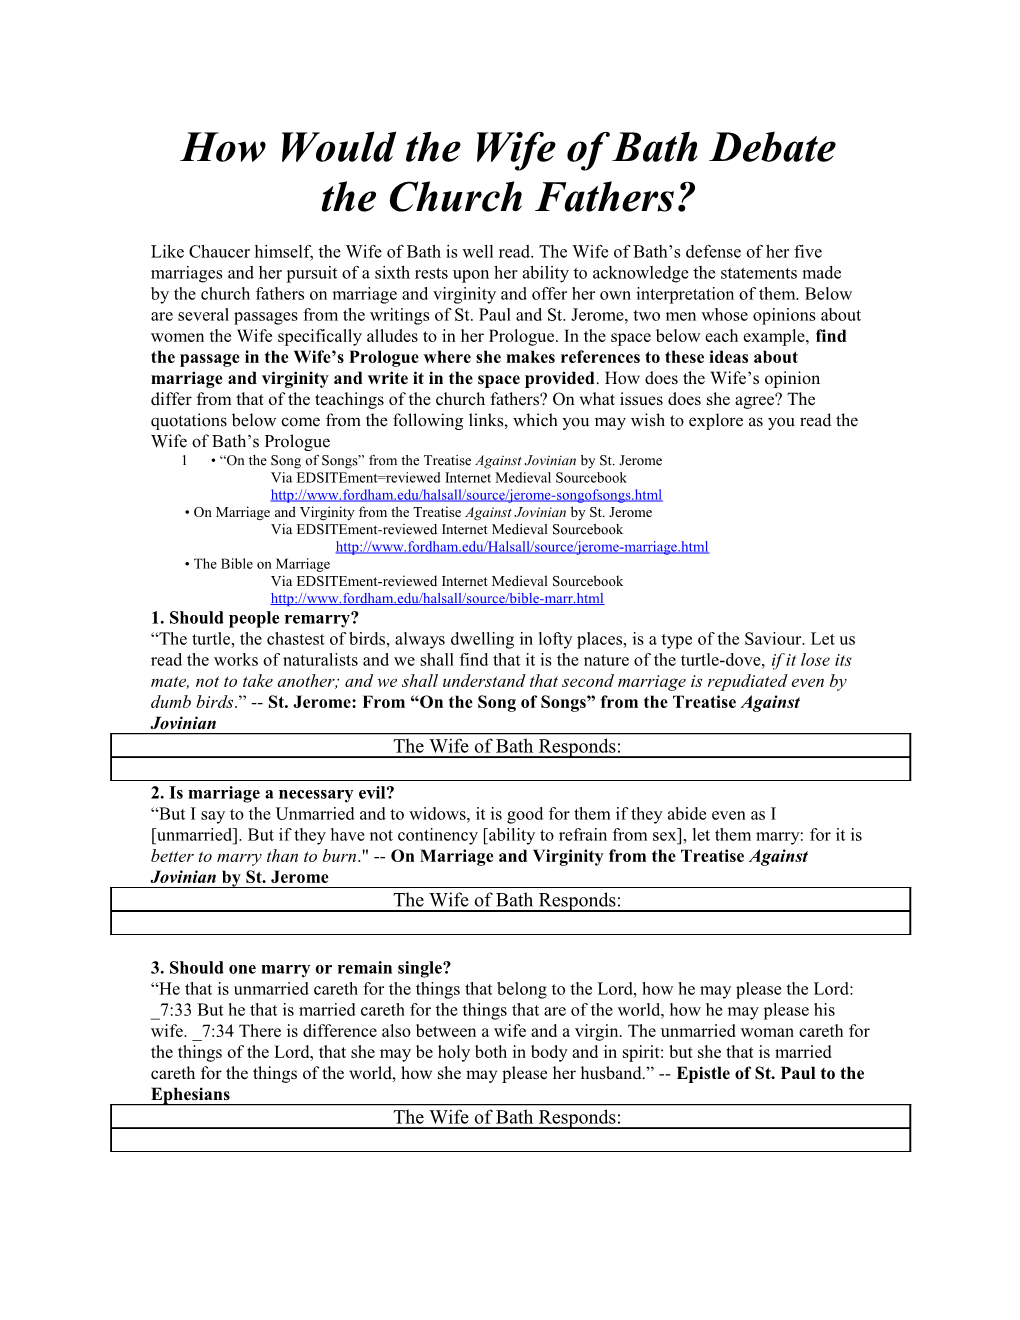 How Would the Wife of Bath Debate the Church Fathers